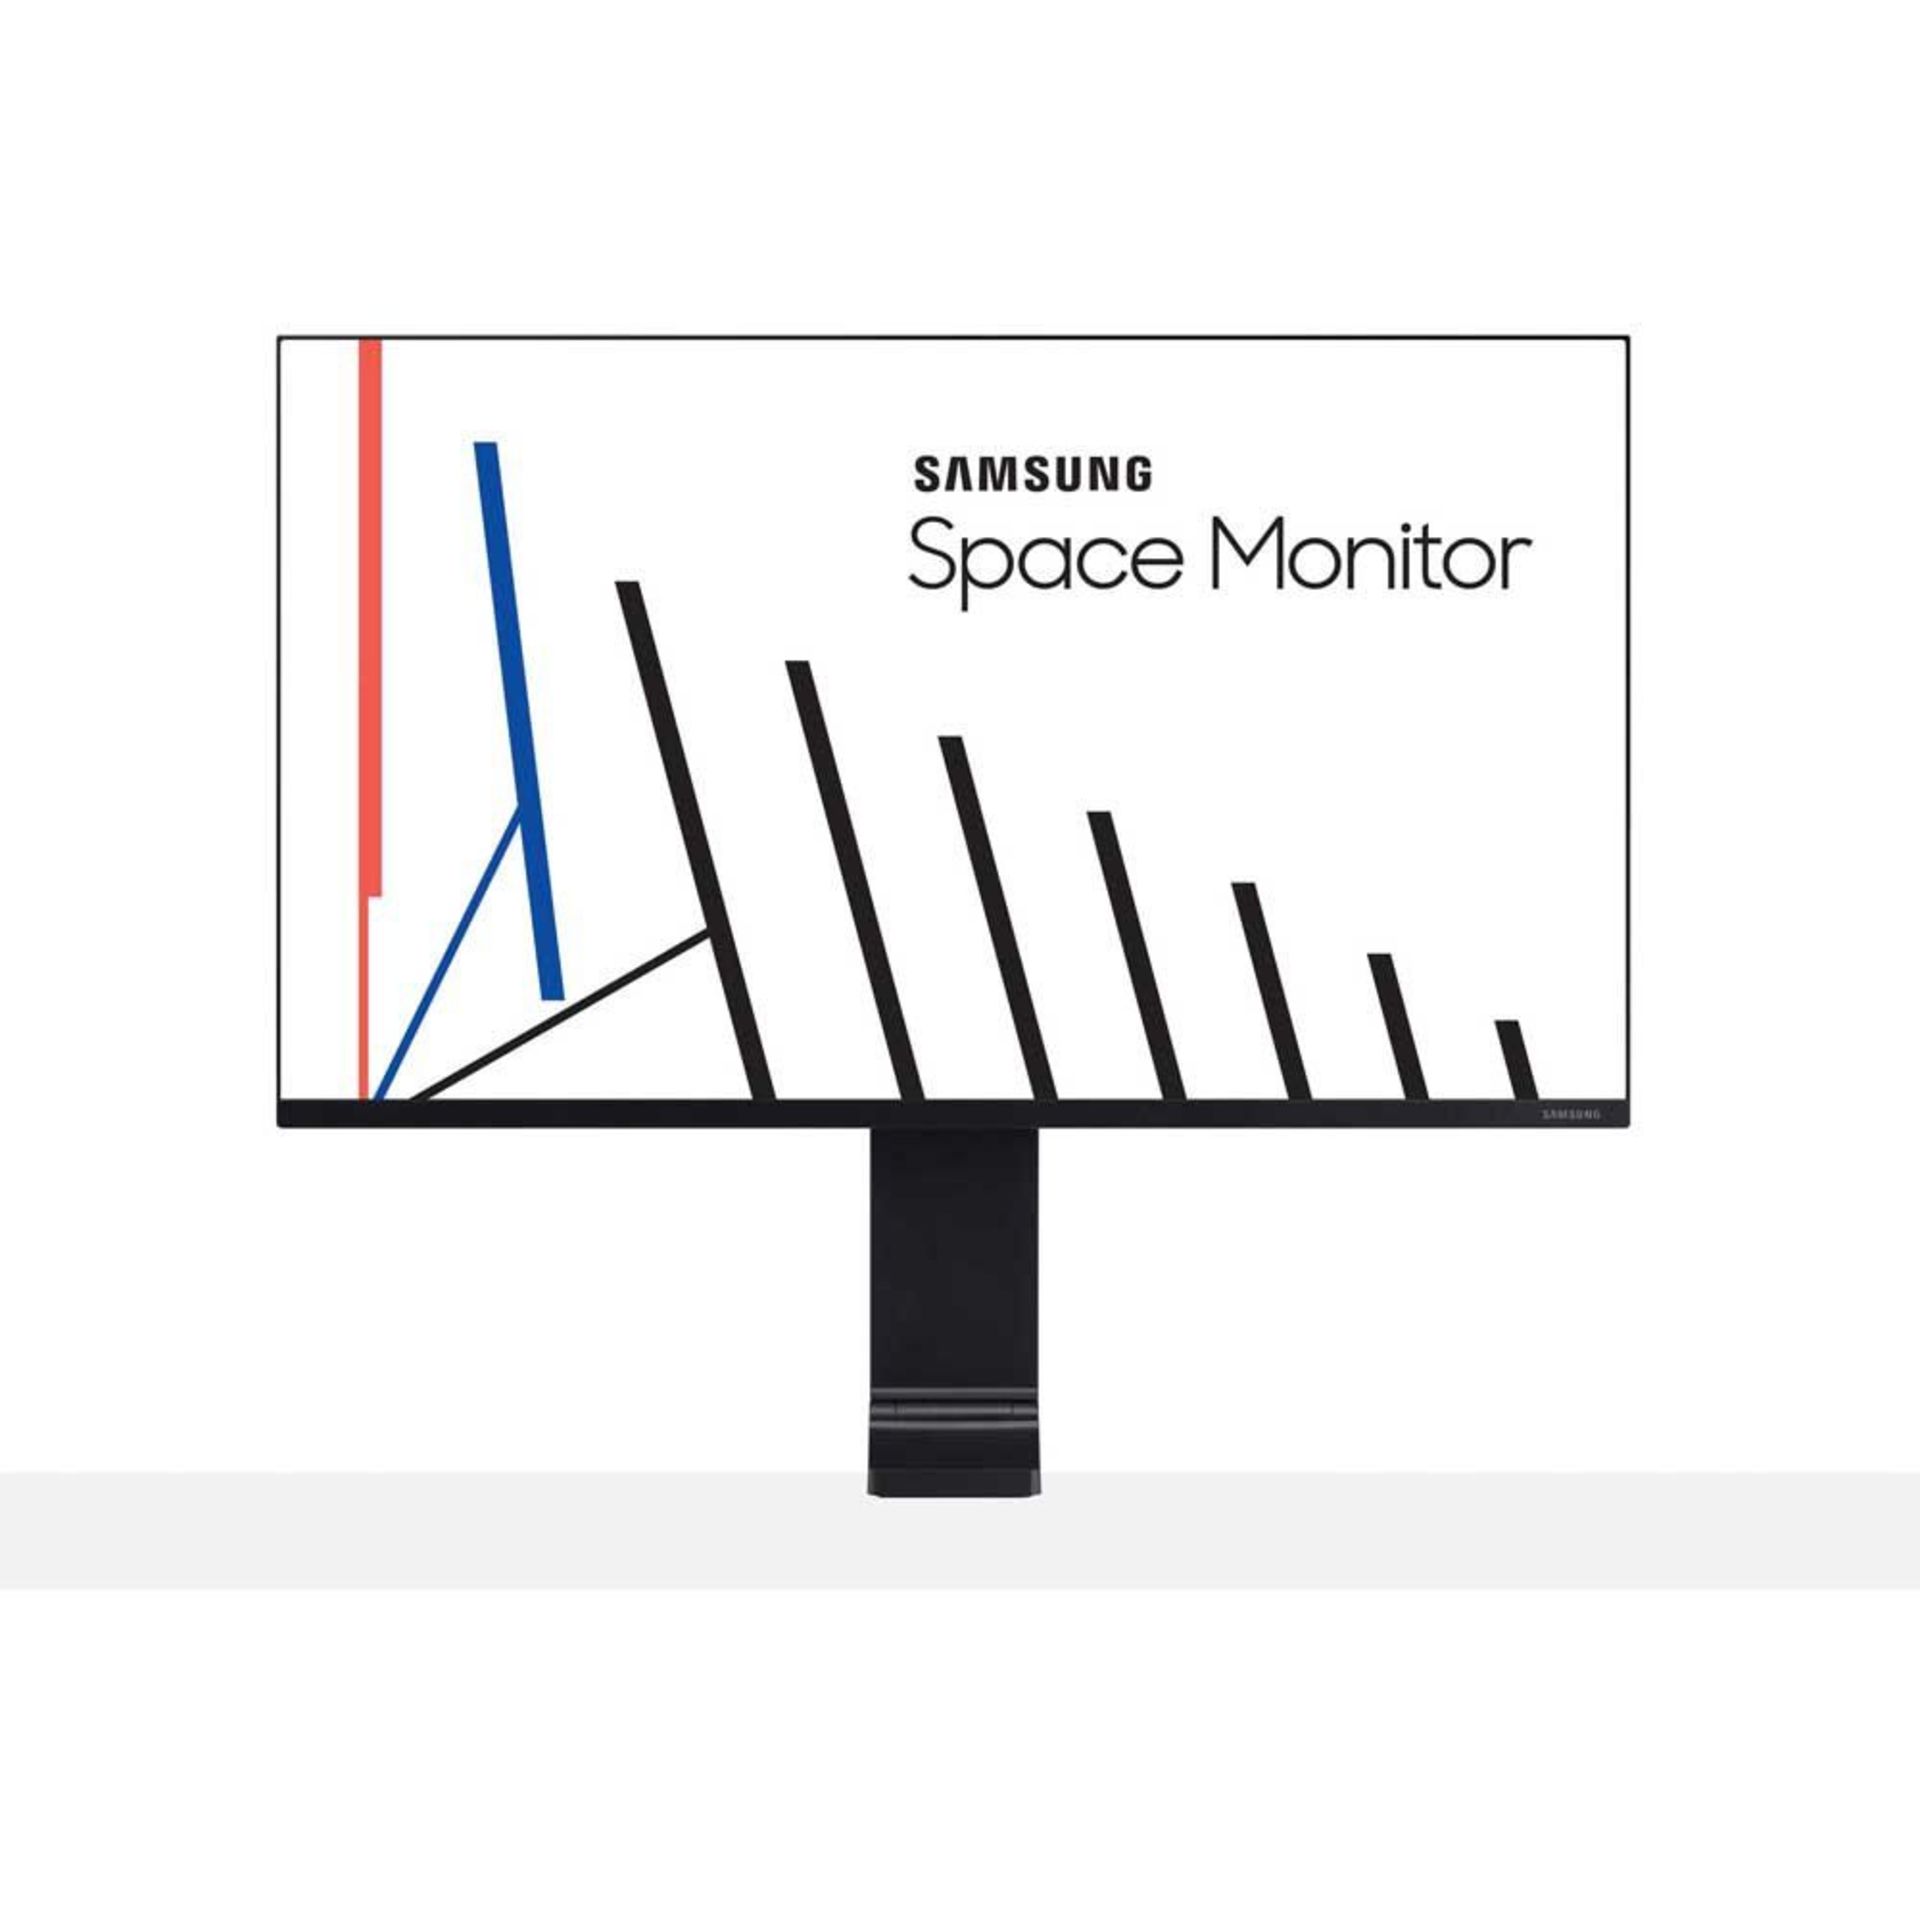 Samsung Space LS32R750 32in 3840x2160 UHD Monitor. - PCKBW. RRP £419.00. The Samsung Space Monitor - Image 2 of 2